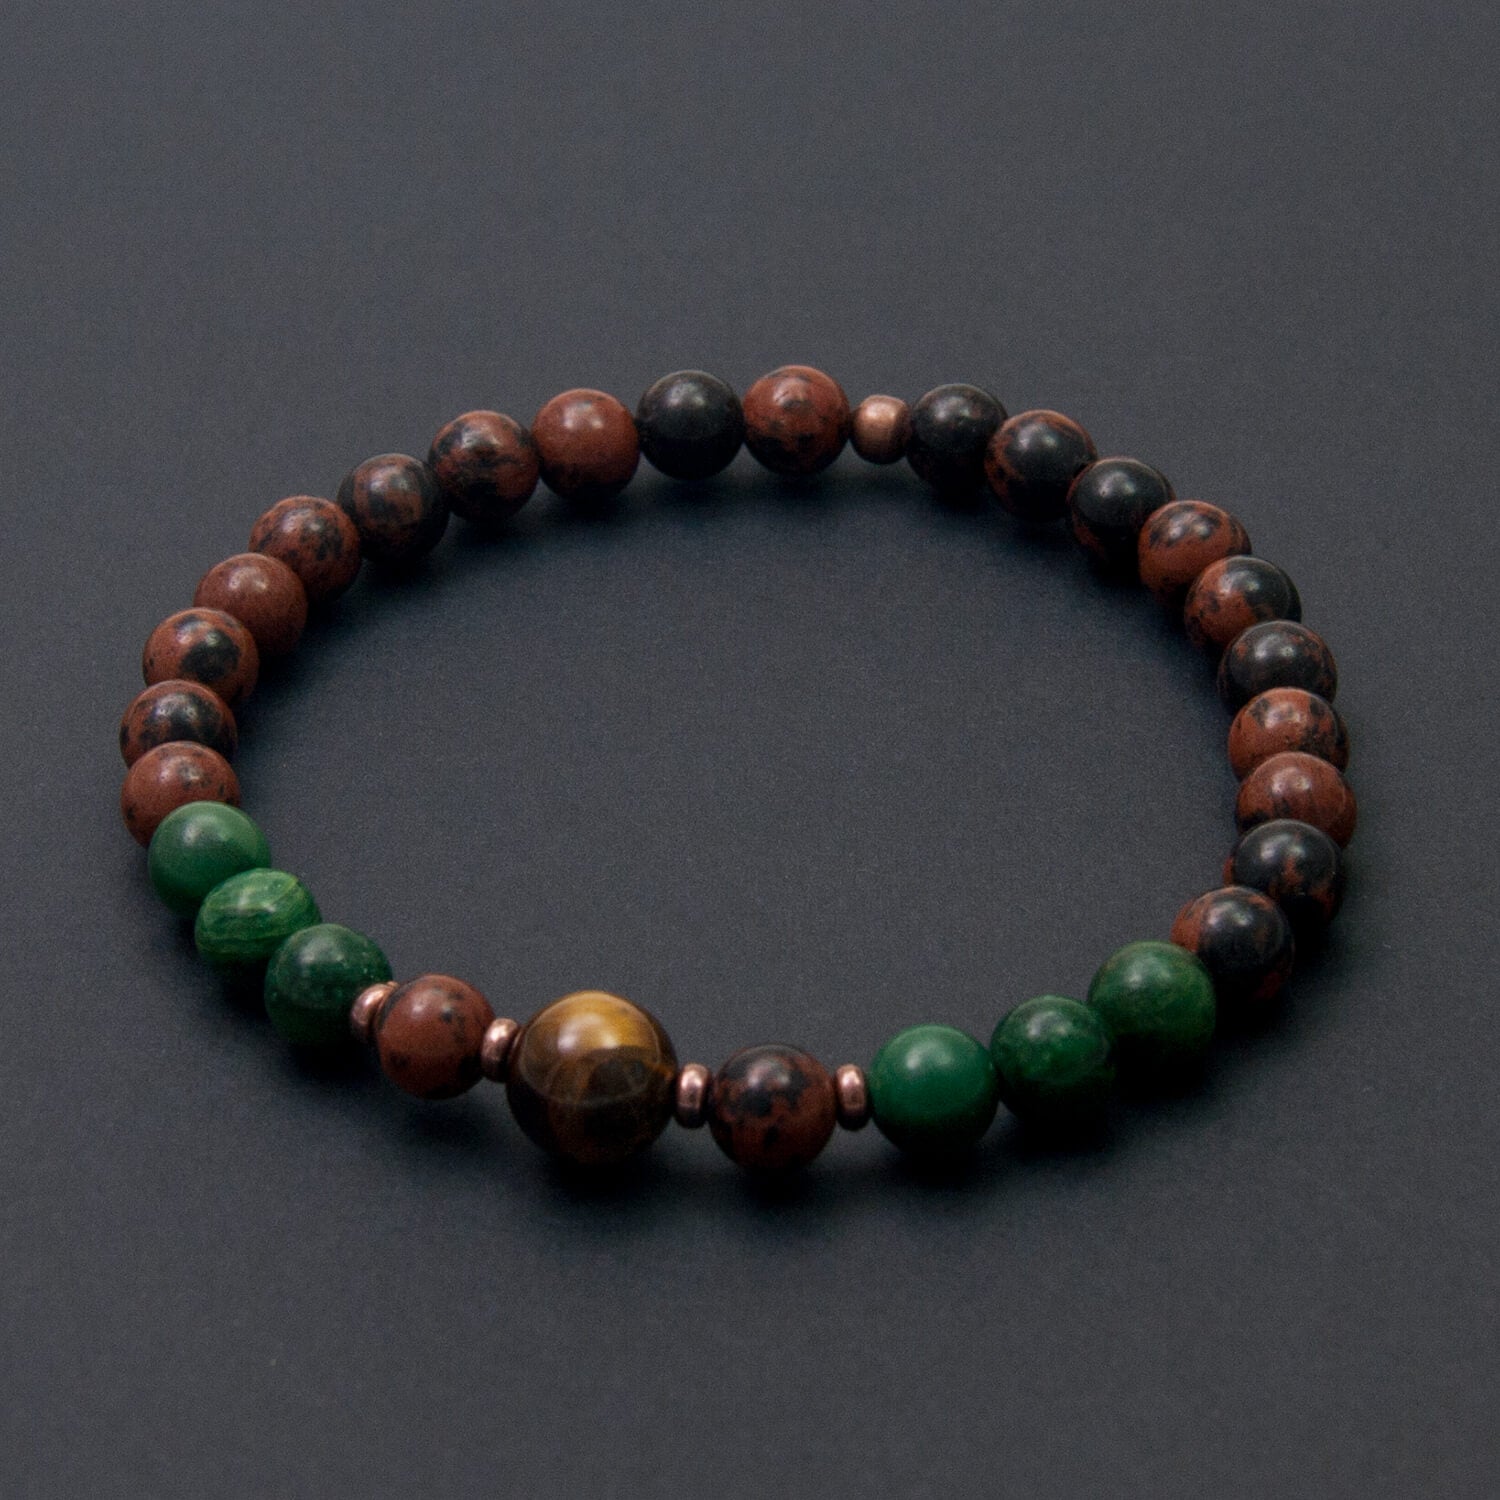 Mahogany Obsidian Bracelet with African Jade and Tiger Eye